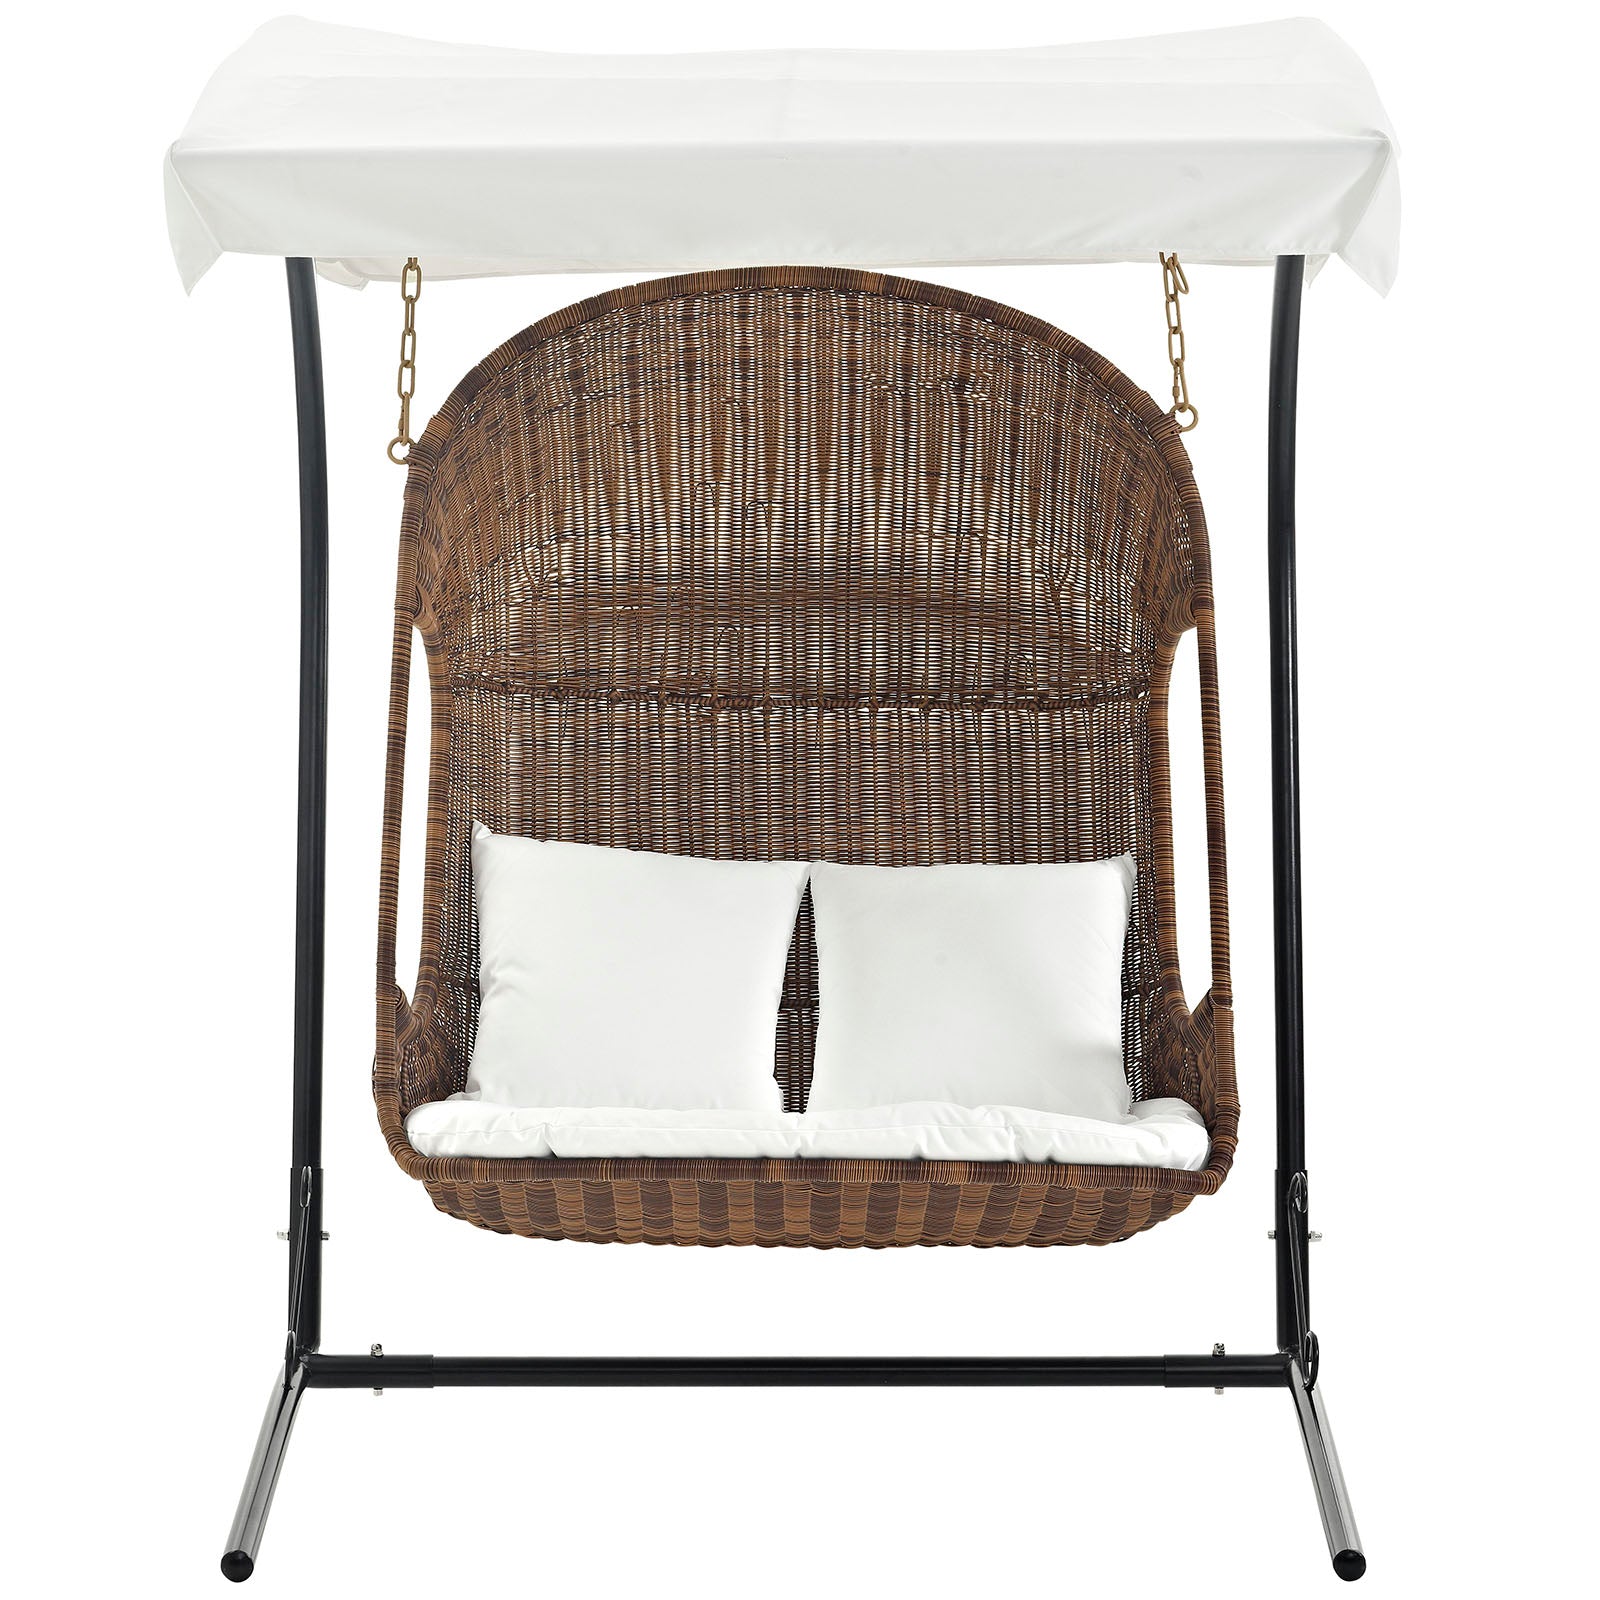 Modway Outdoor Swings - Vantage Outdoor Swing Chair With Stand Brown & White